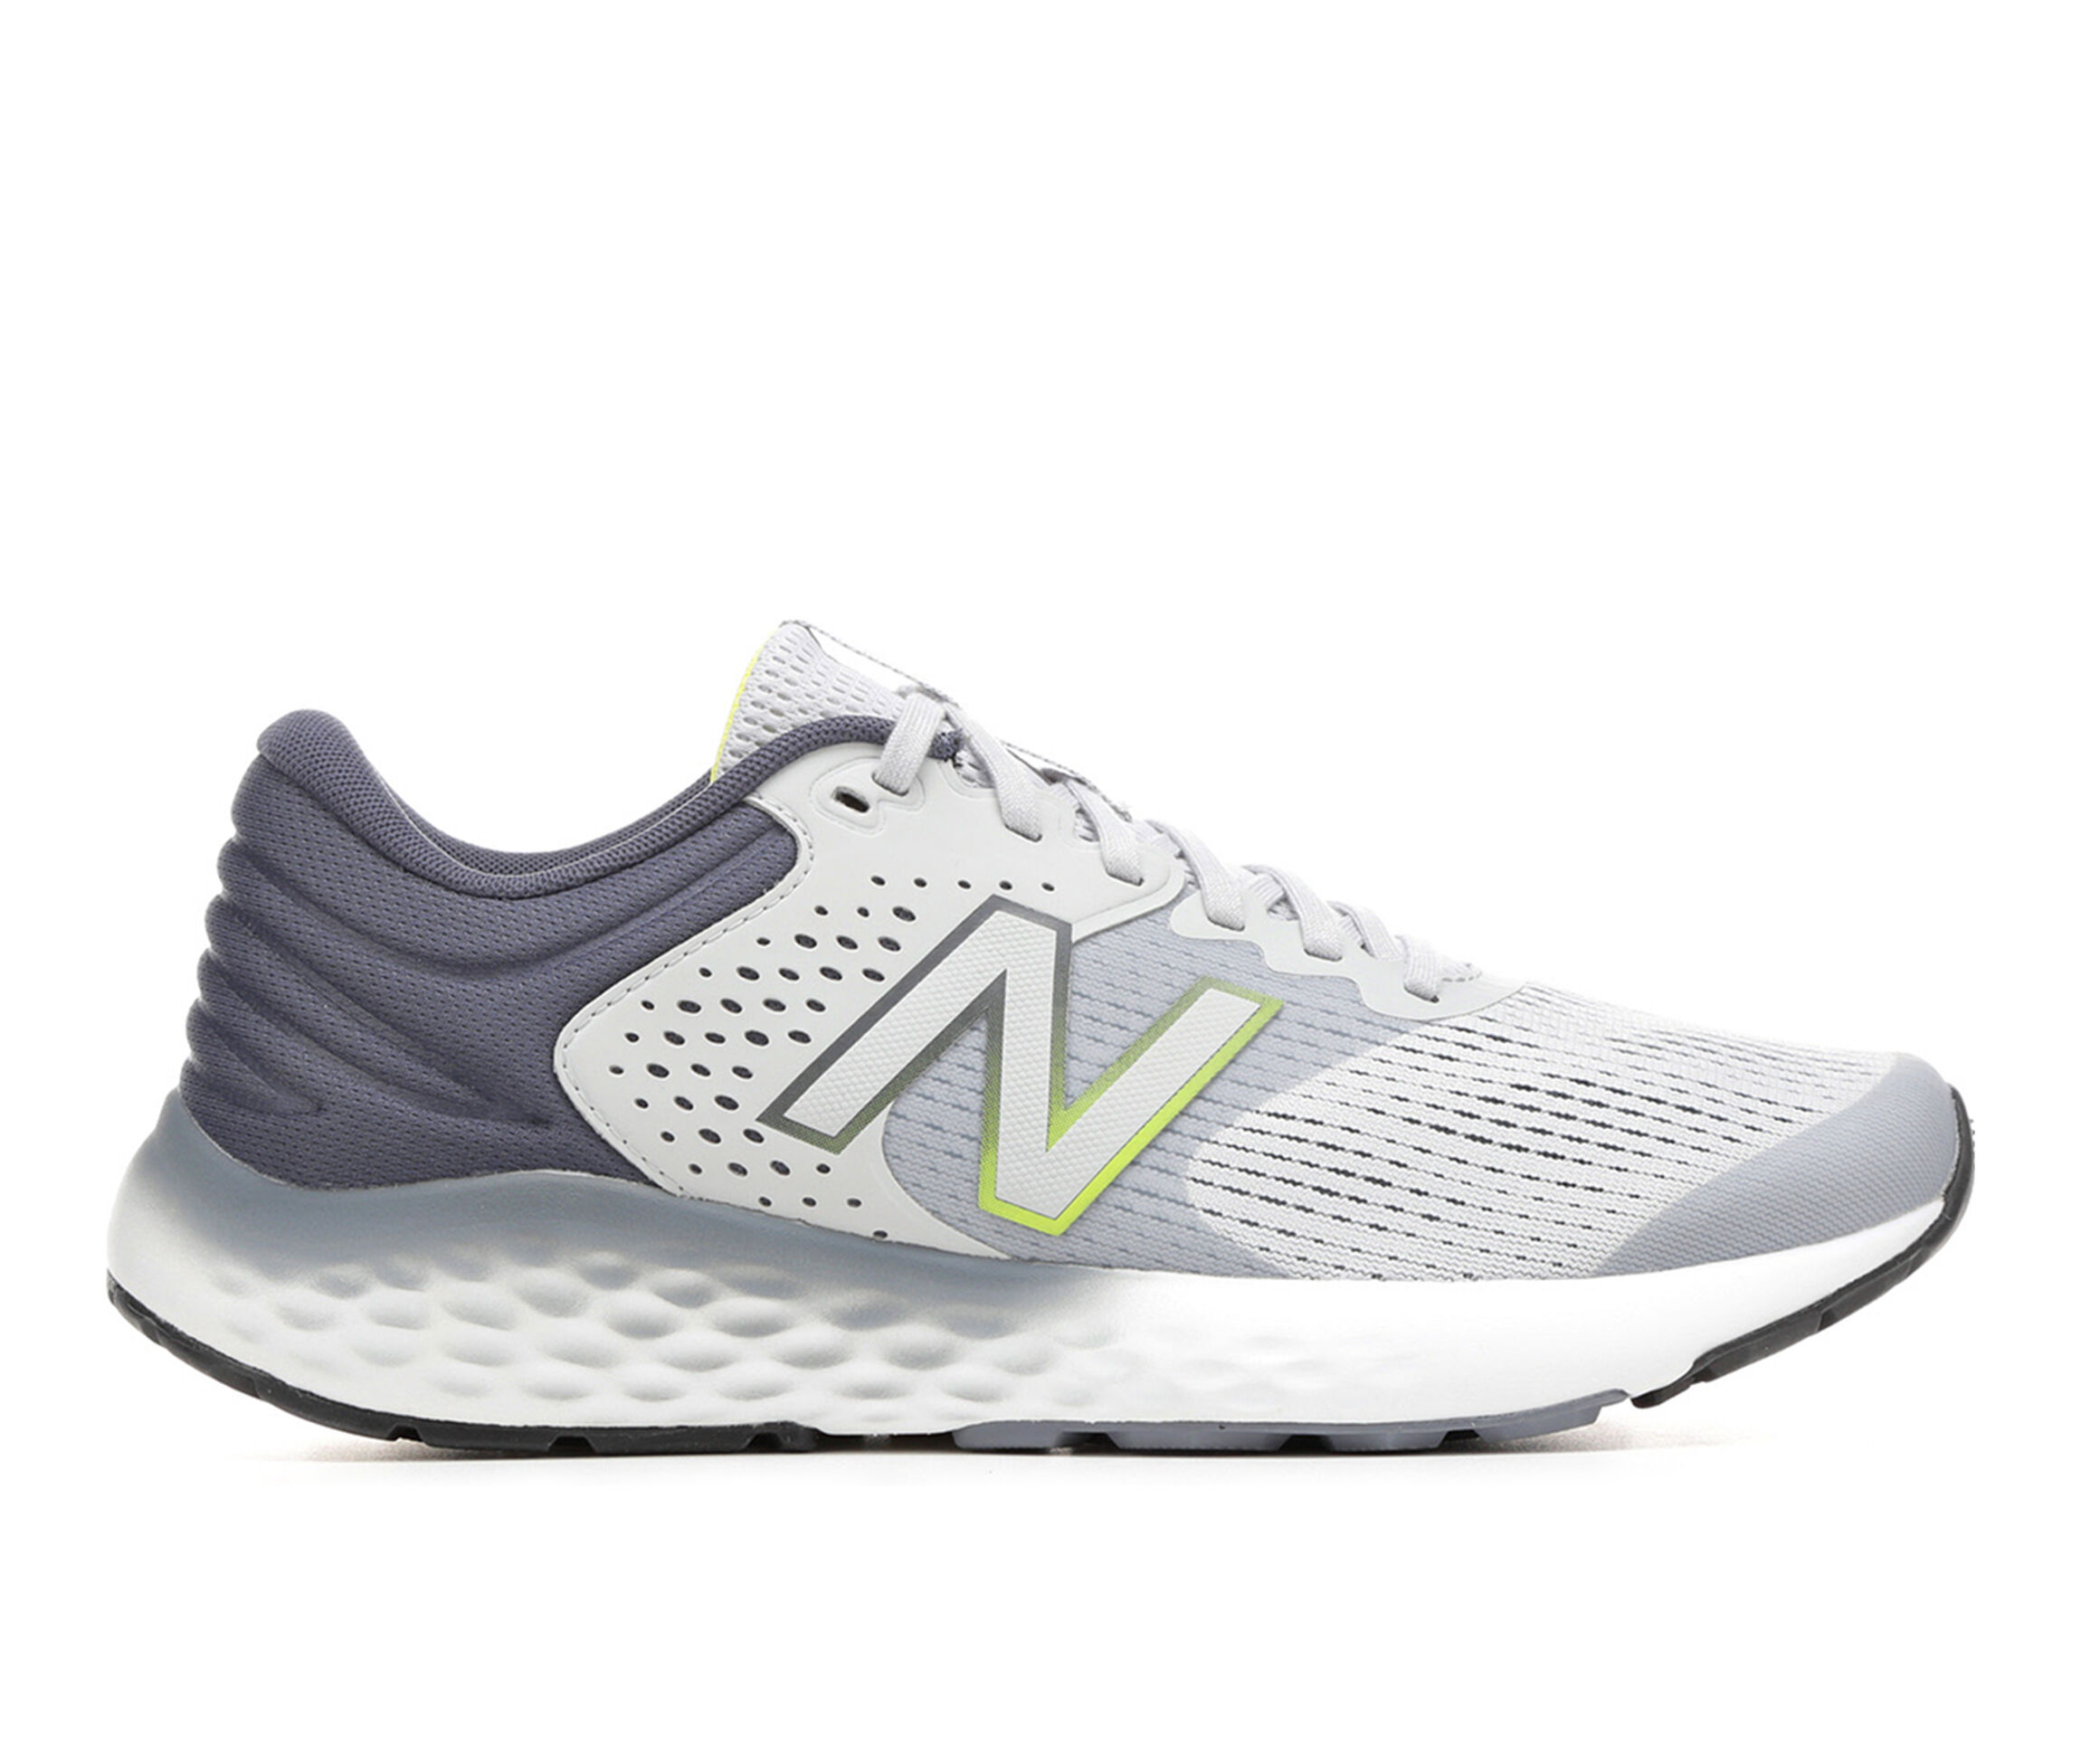 New Balance Shoes & Accessories | Shoe Carnival